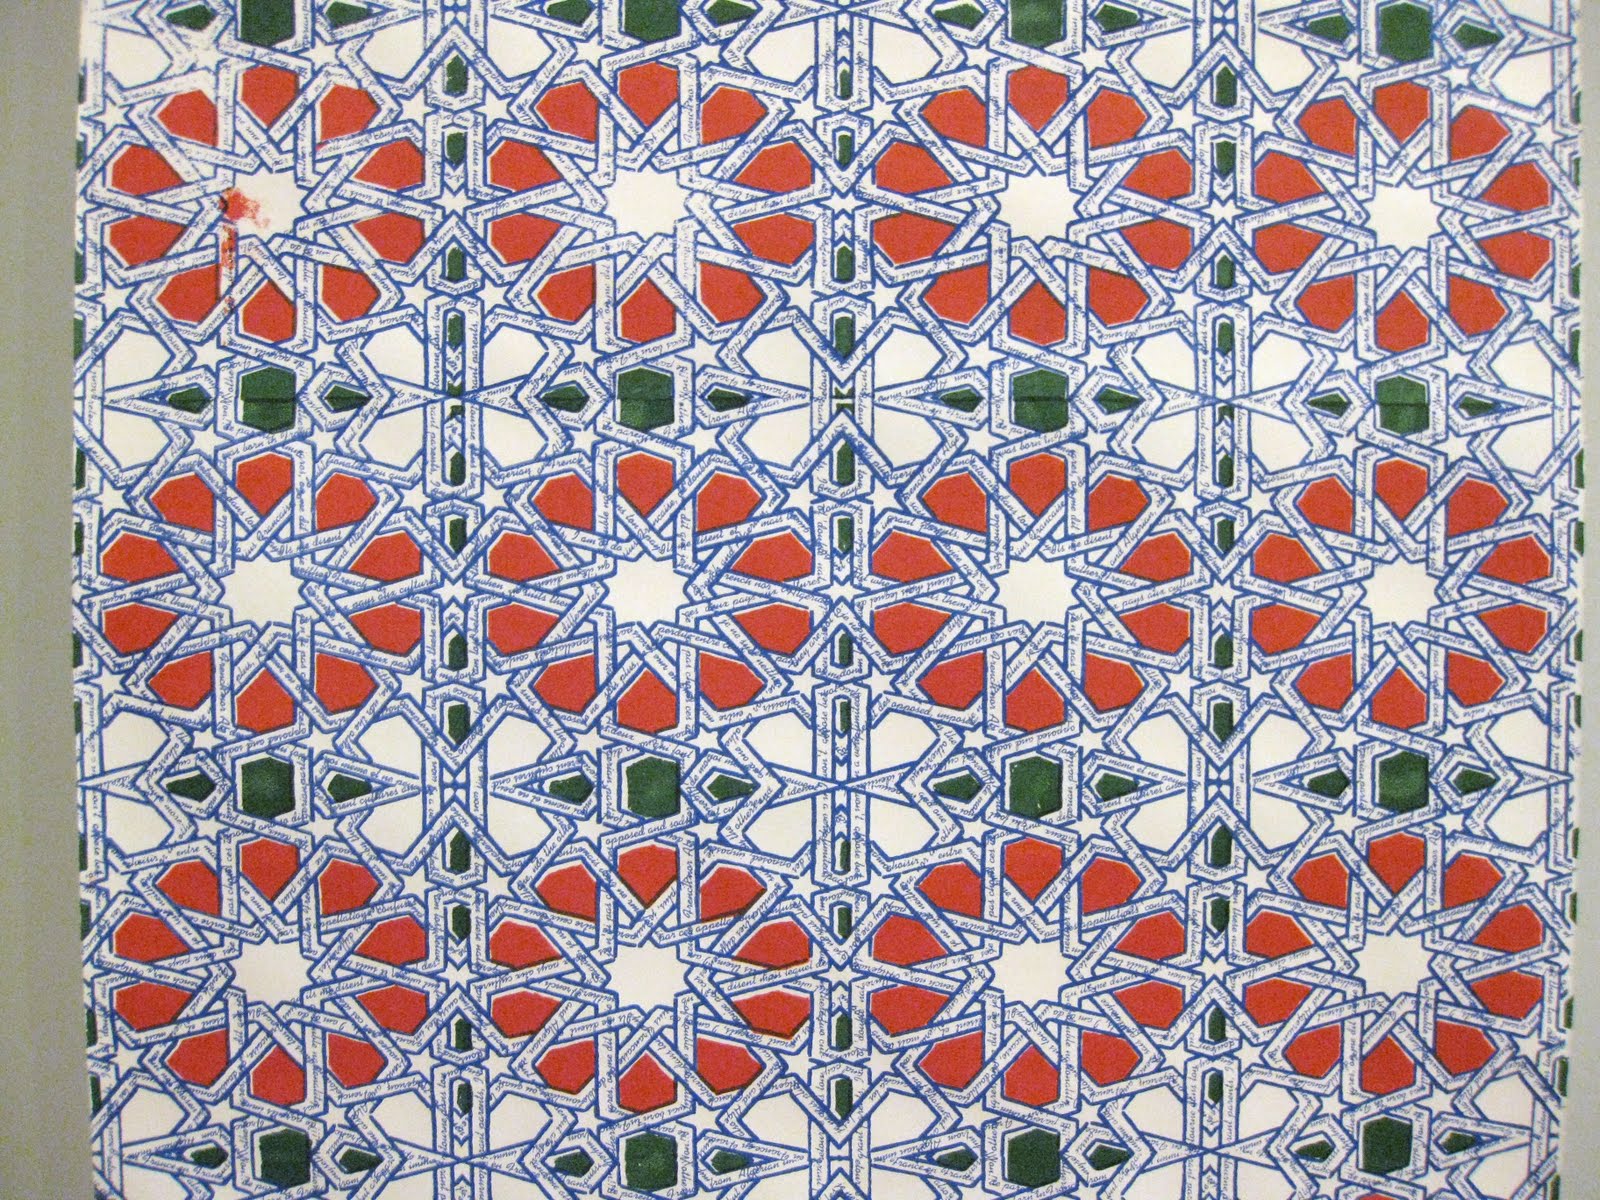 ... grid referencing the patterns of traditional Islamic wall tiles